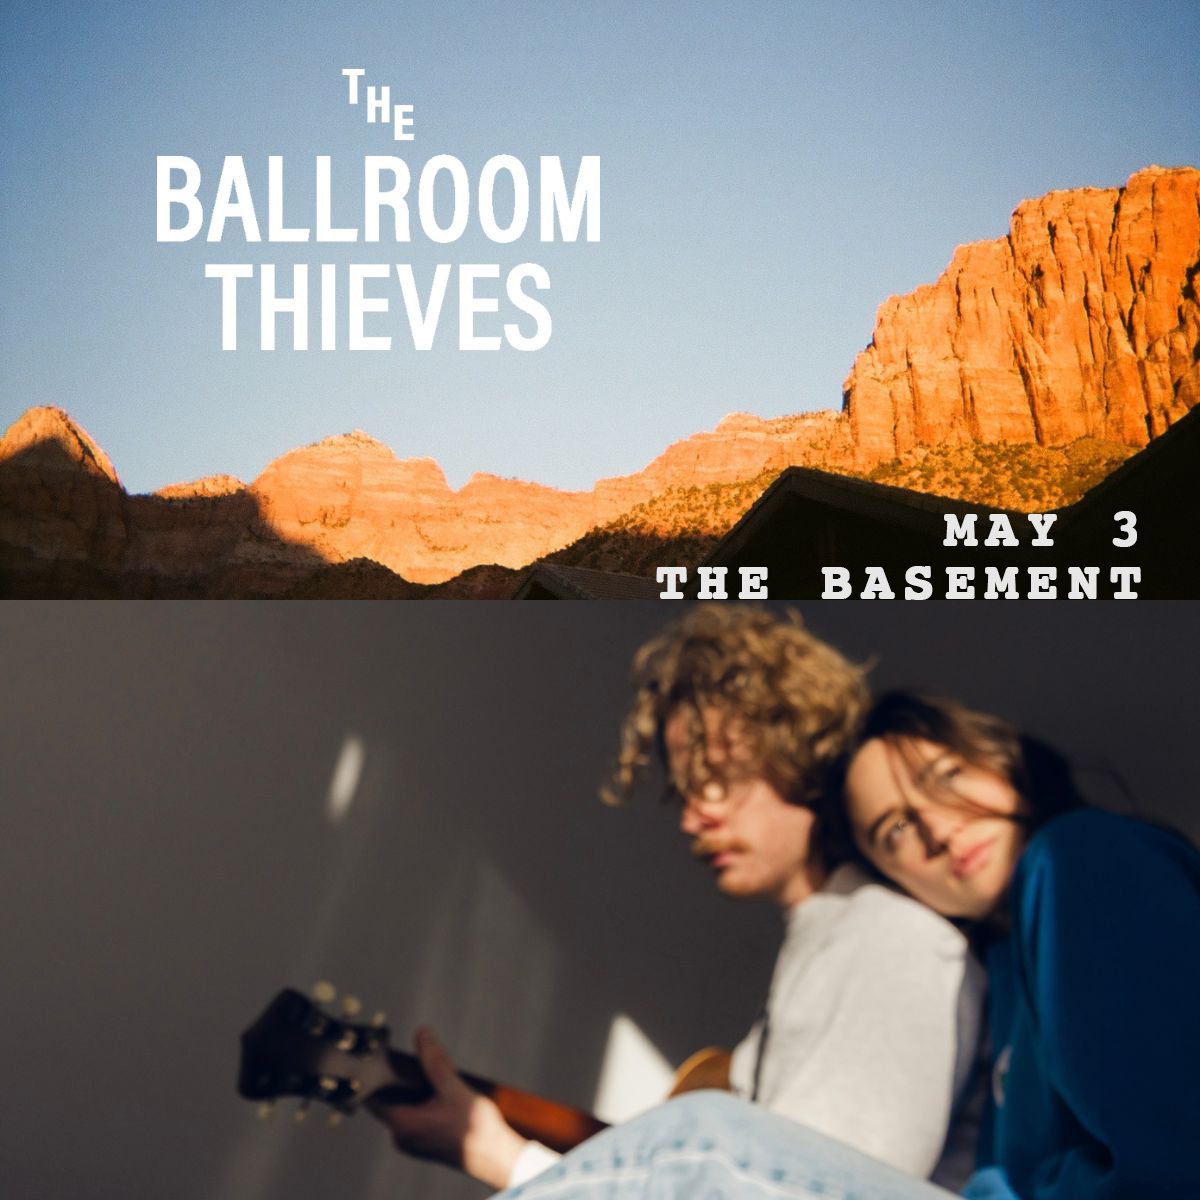 TONIGHT!! @BallroomThieves is in the house at 7PM! Grab tickets when doors open at 6:30PM or at thebasementnashville.com 🎟️